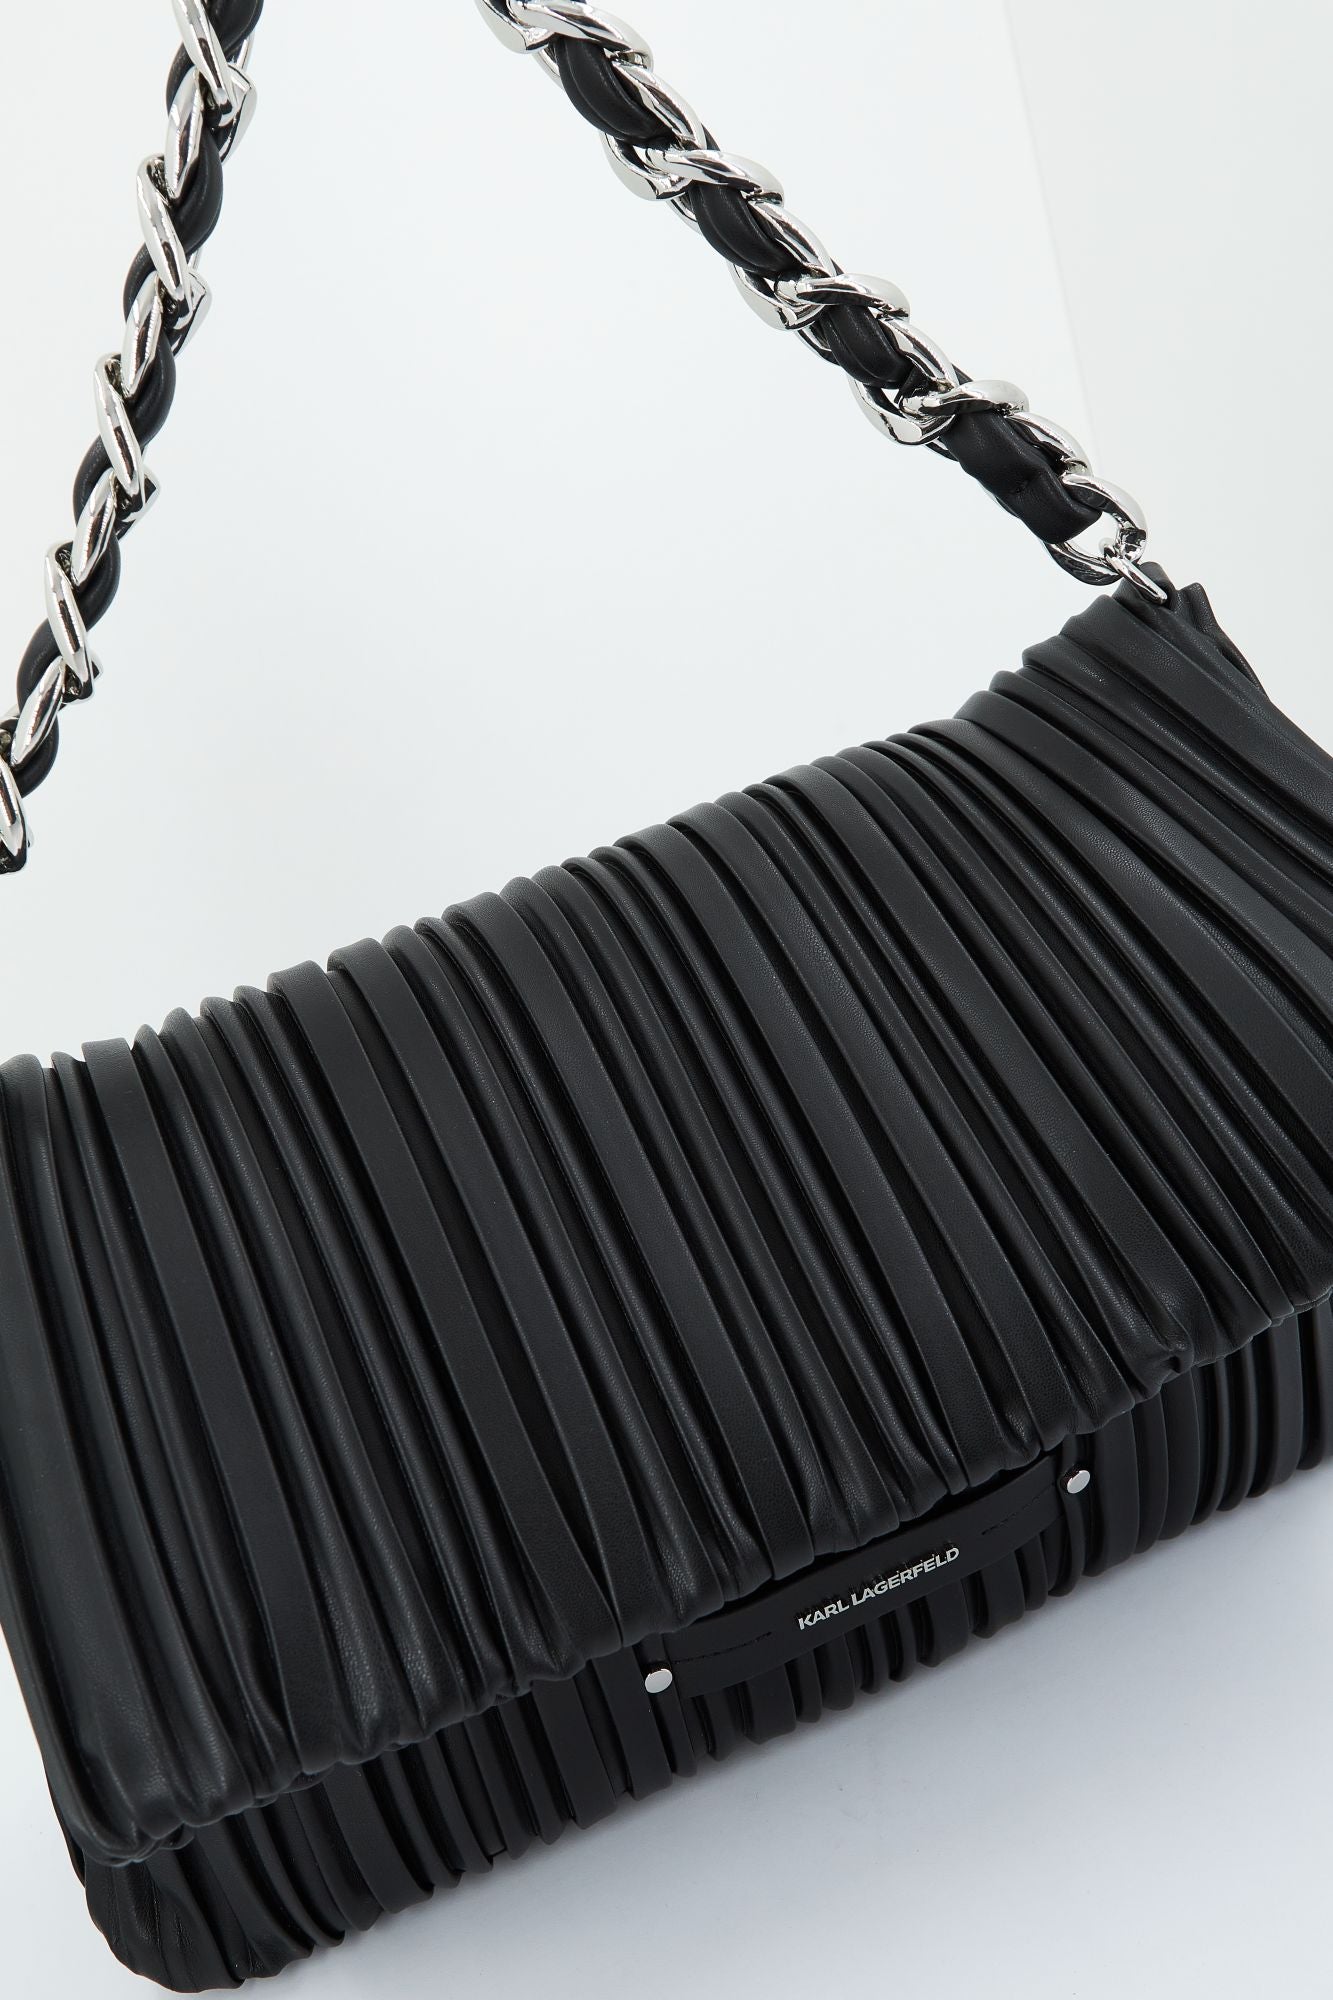 KARL LAGERFELD K/KUSHION CHAIN MD FOLD TOTE en color NEGRO (3)